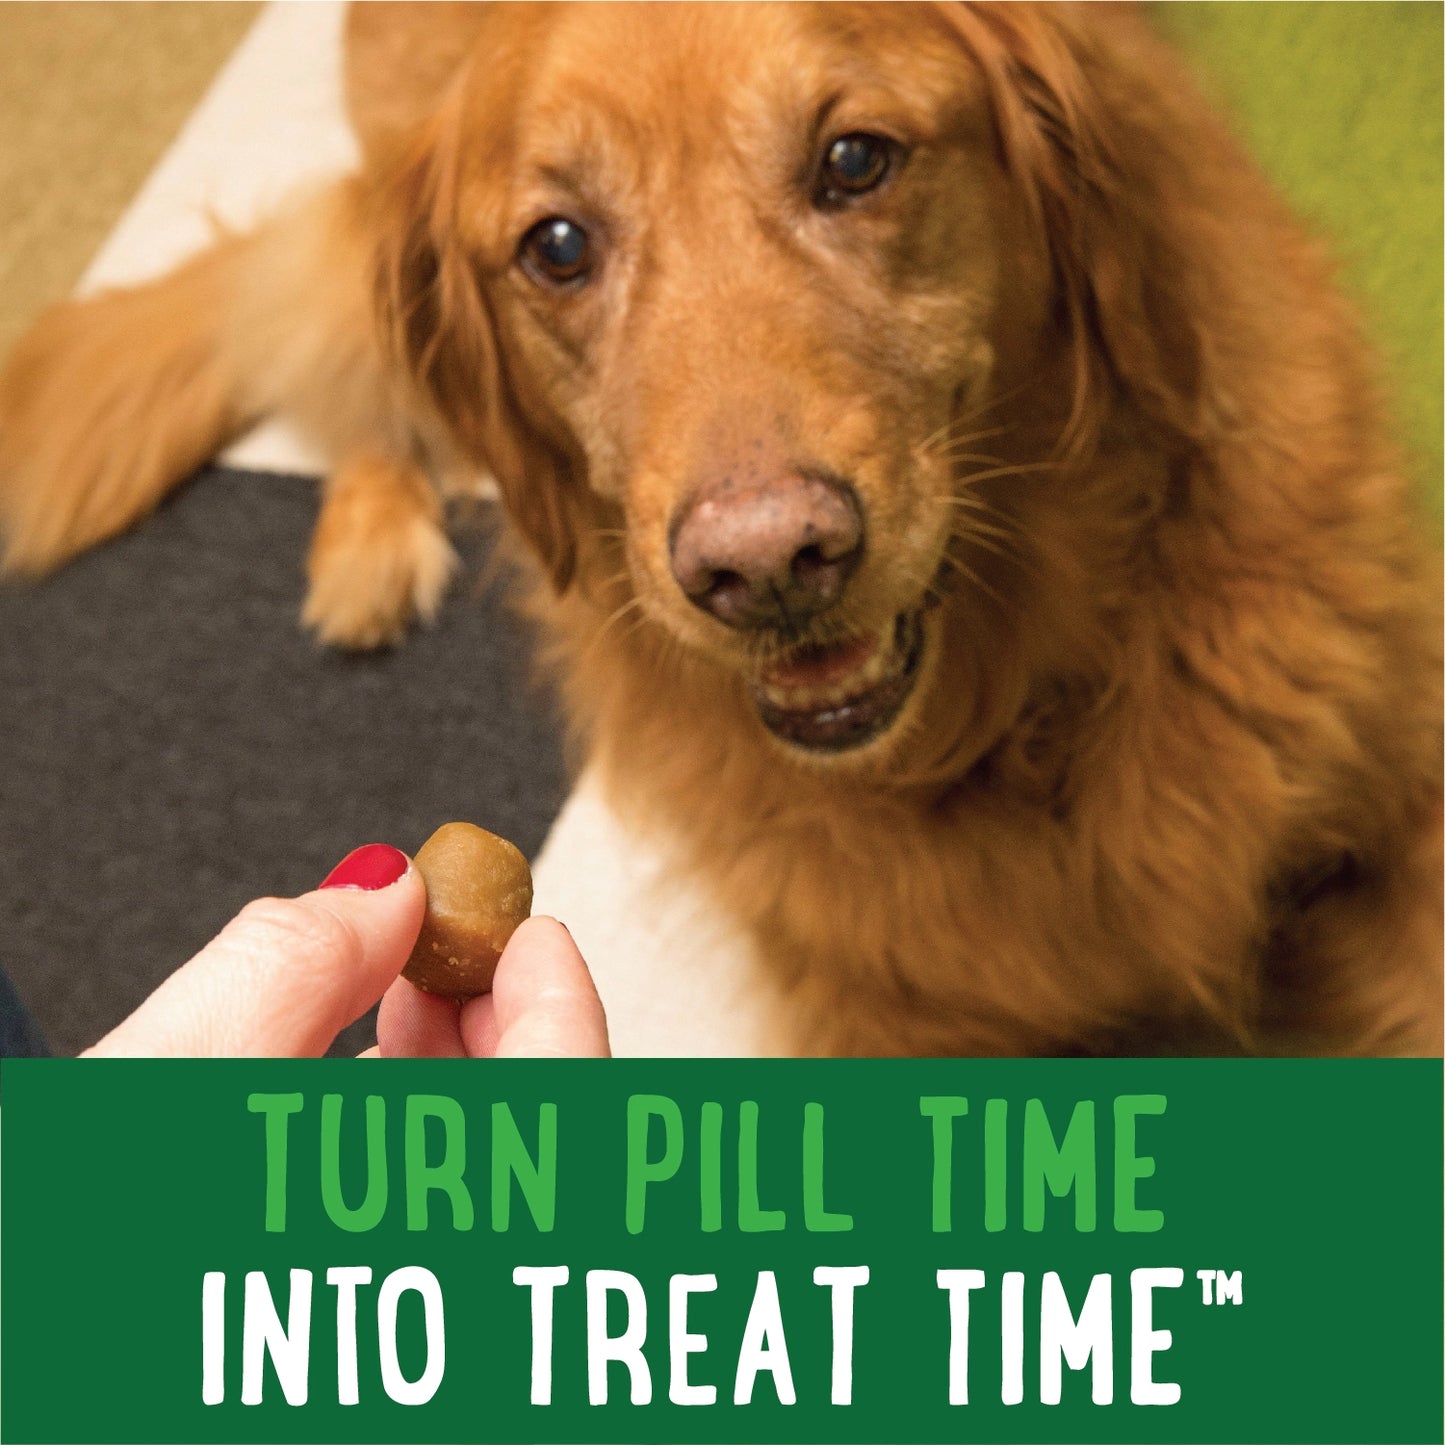 Turn pill time into treat time